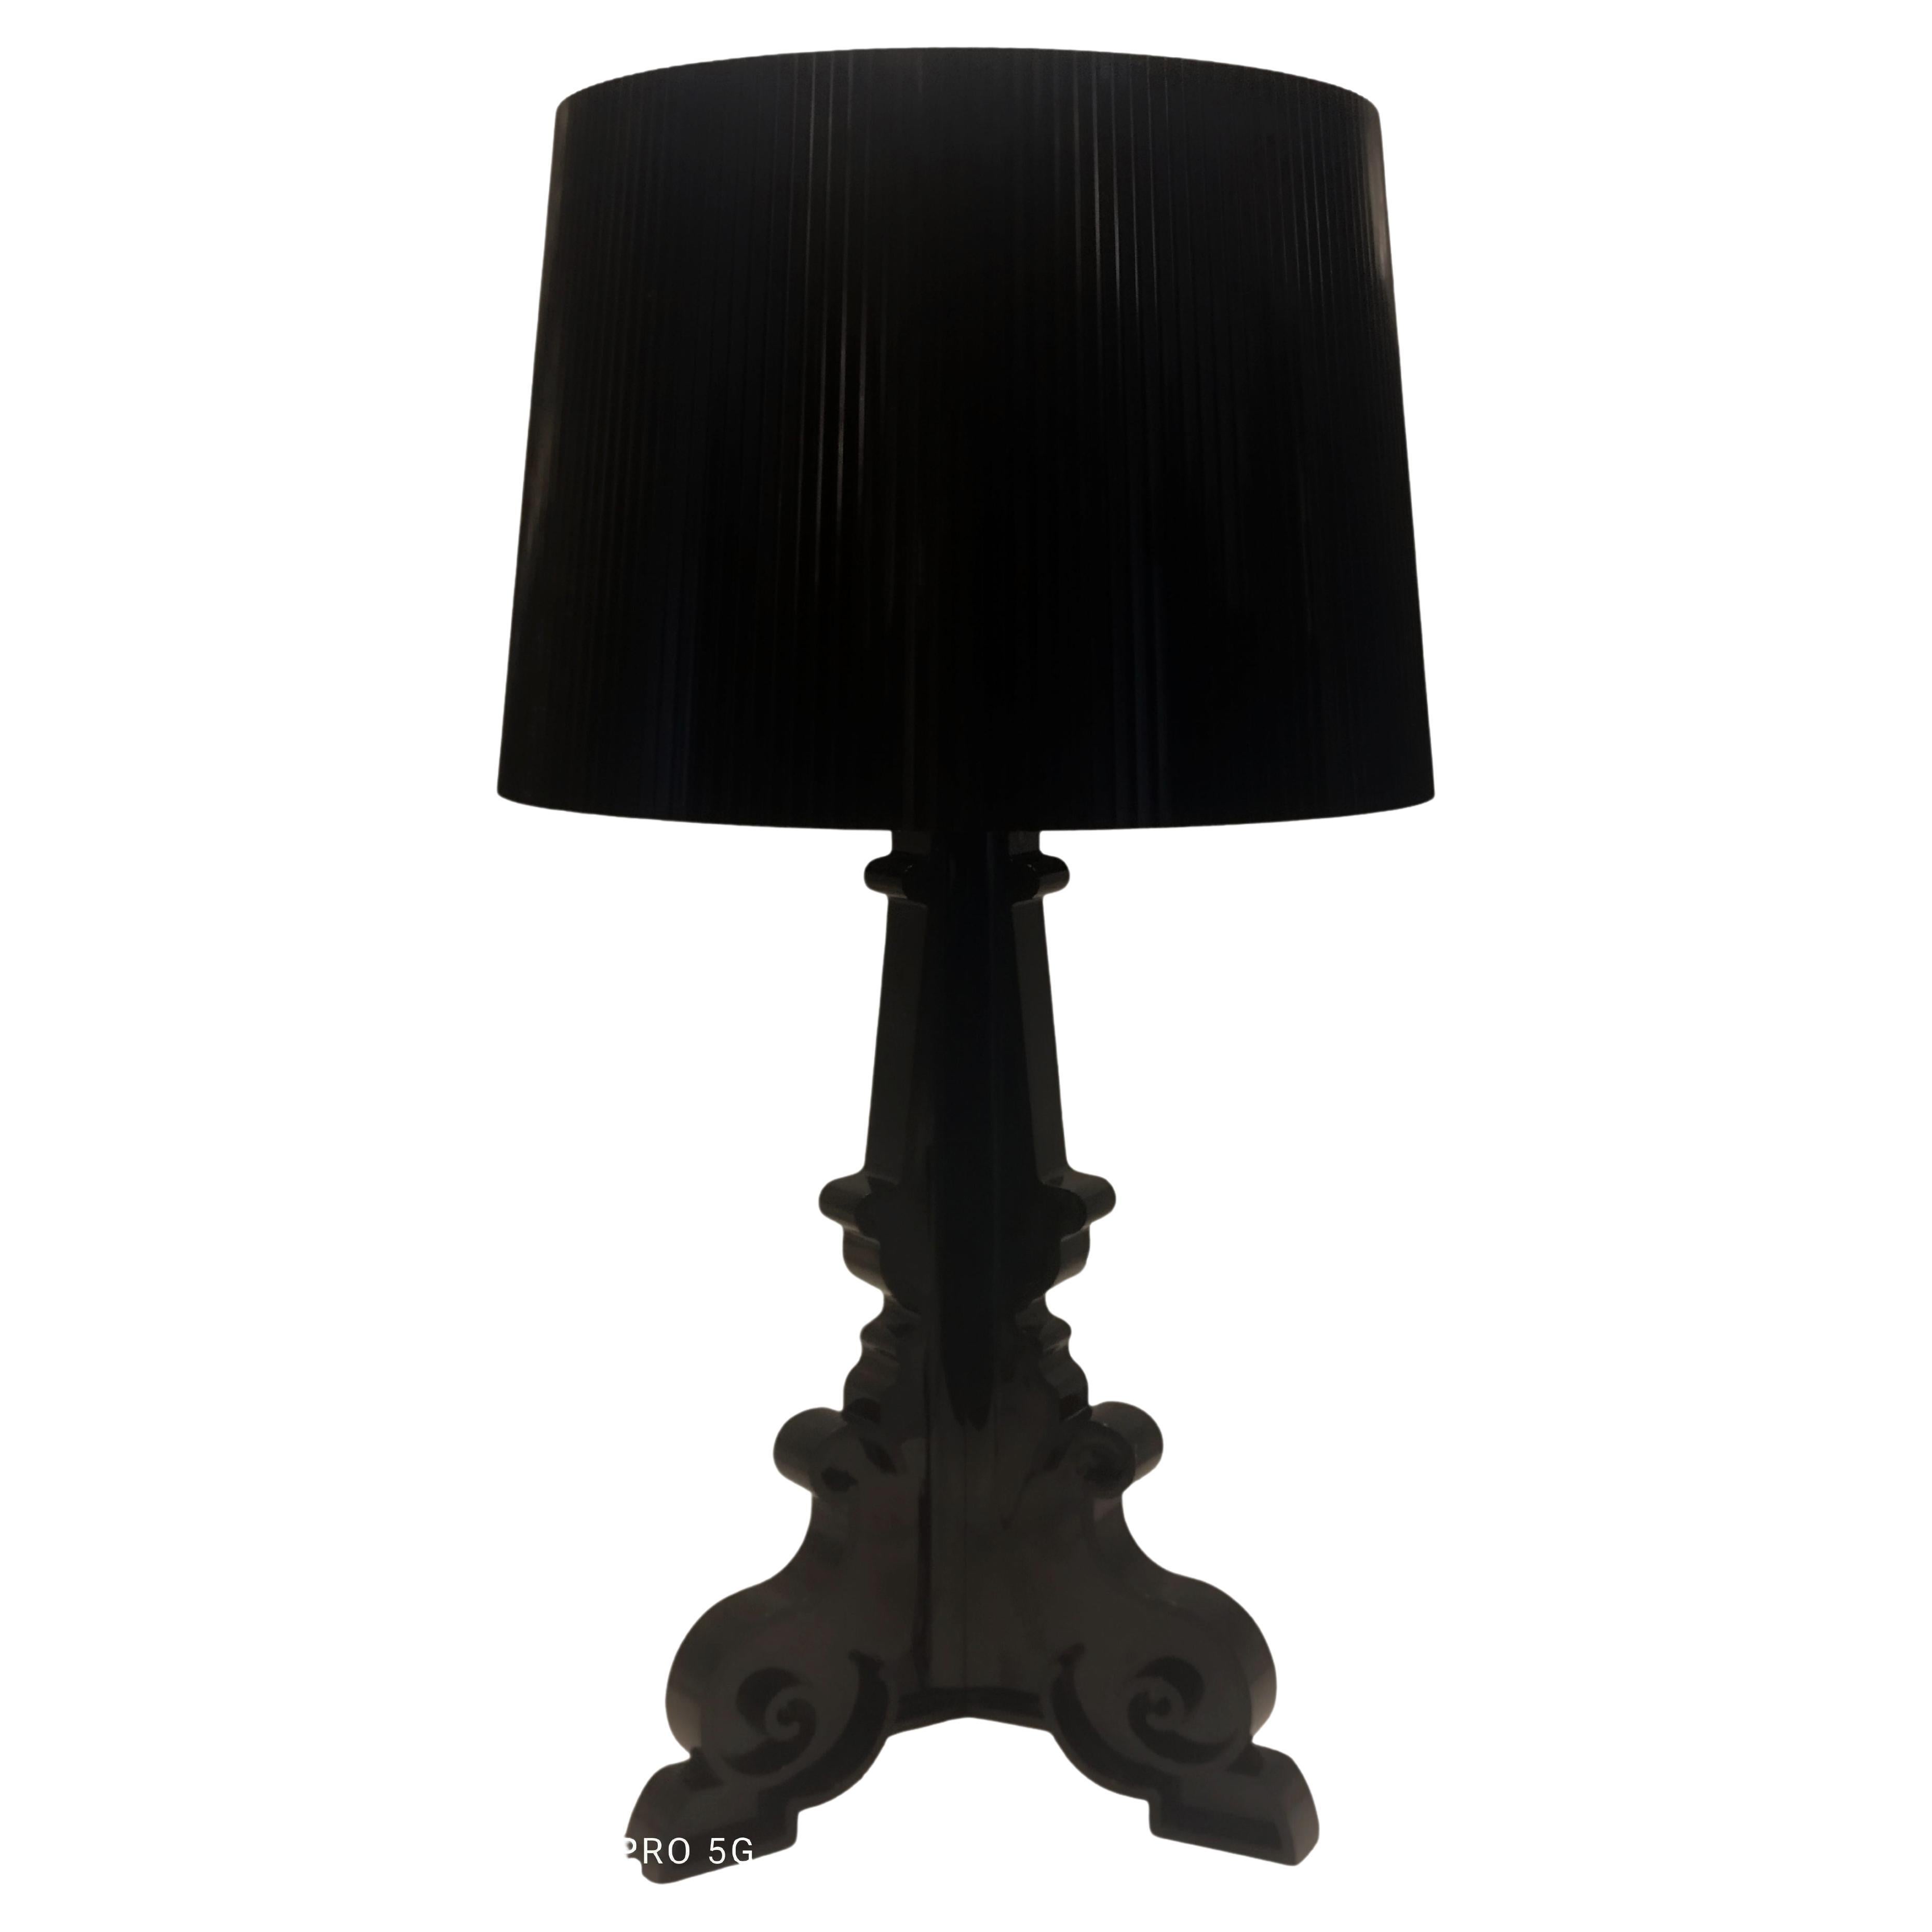 Ferruccio Laviani for Kartell Black "Bourgie" Table Lamp, Italy 2015